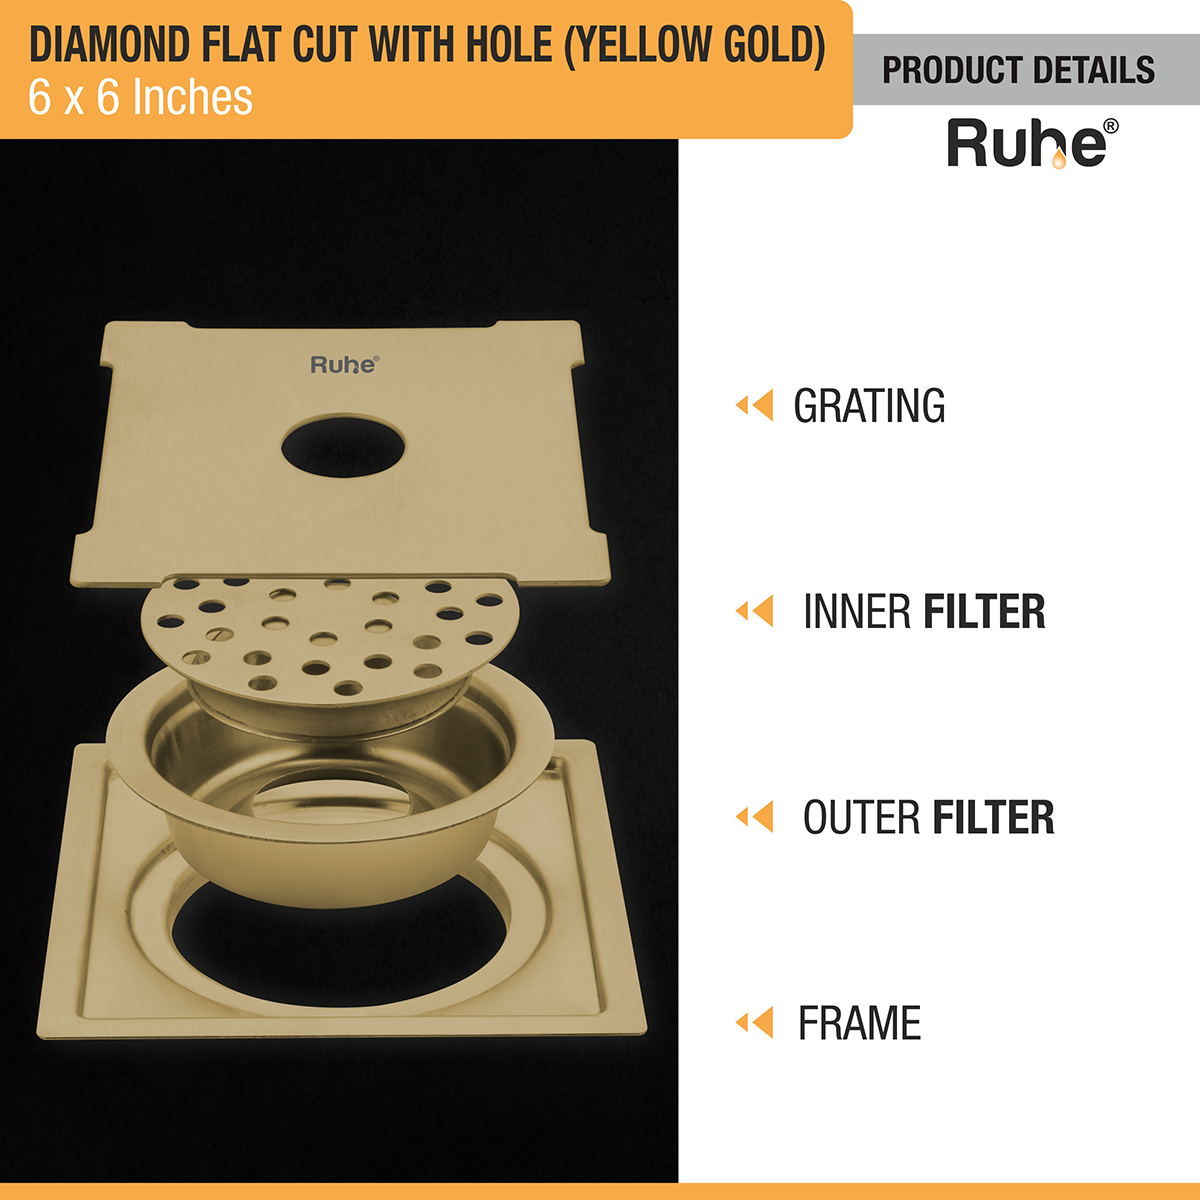 Diamond Square Flat Cut Floor Drain in Yellow Gold PVD Coating (6 x 6 Inches) with Hole product details